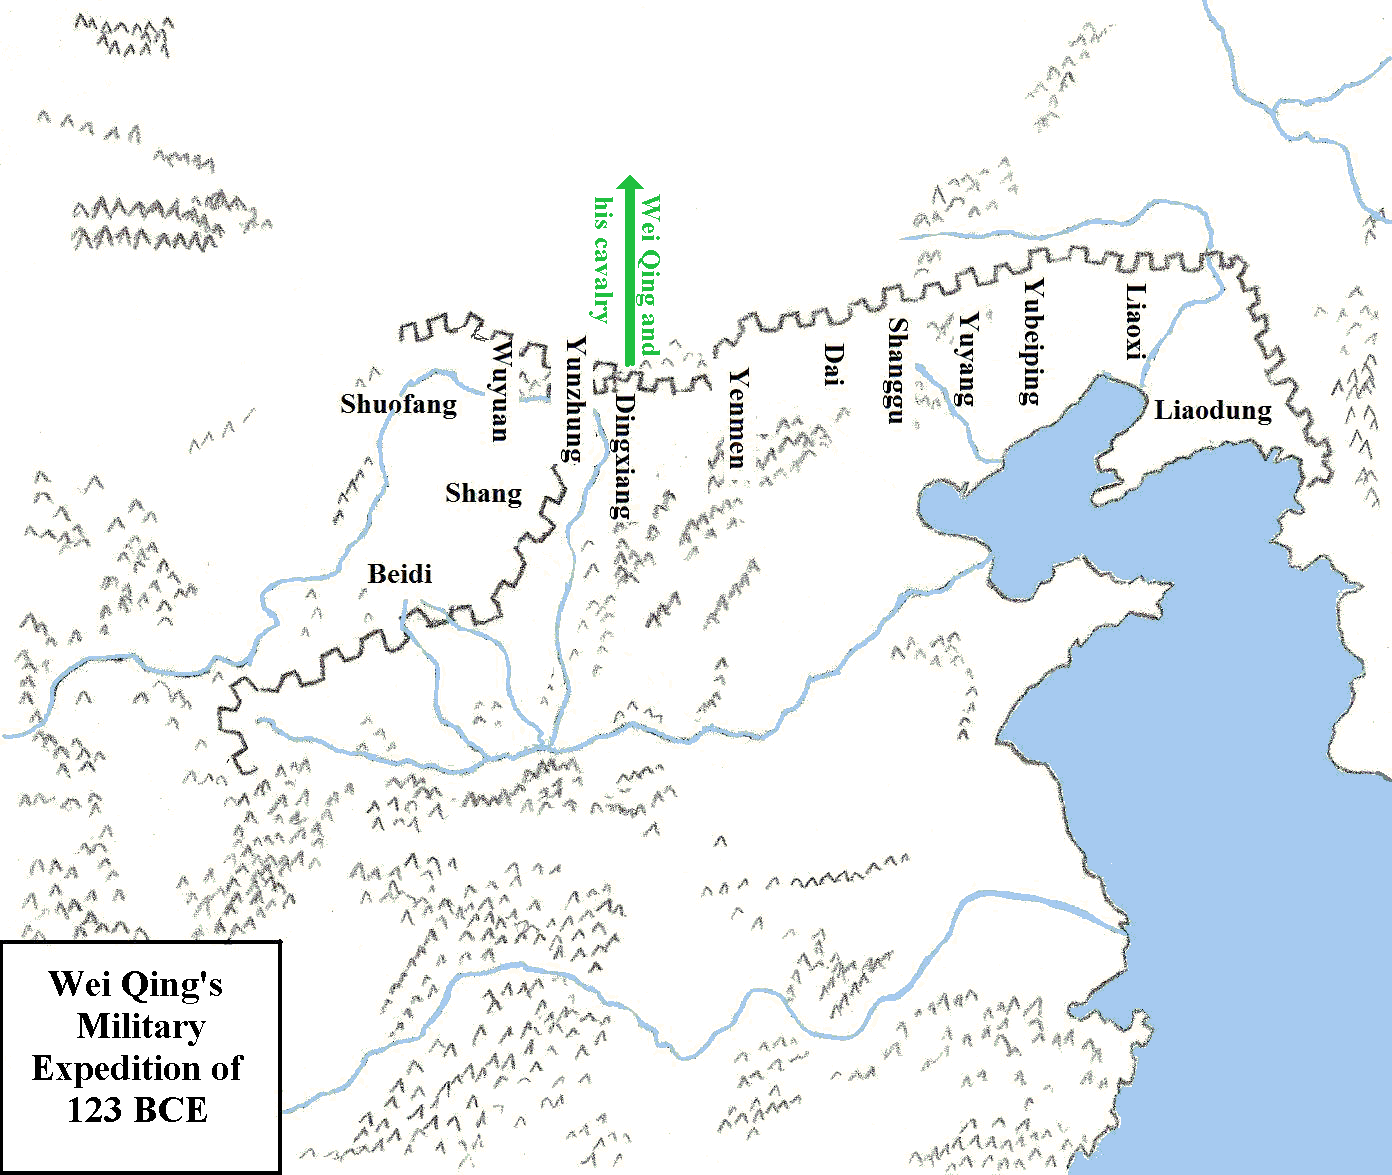 Map showing Wei Qing's expedition in 123 BCE